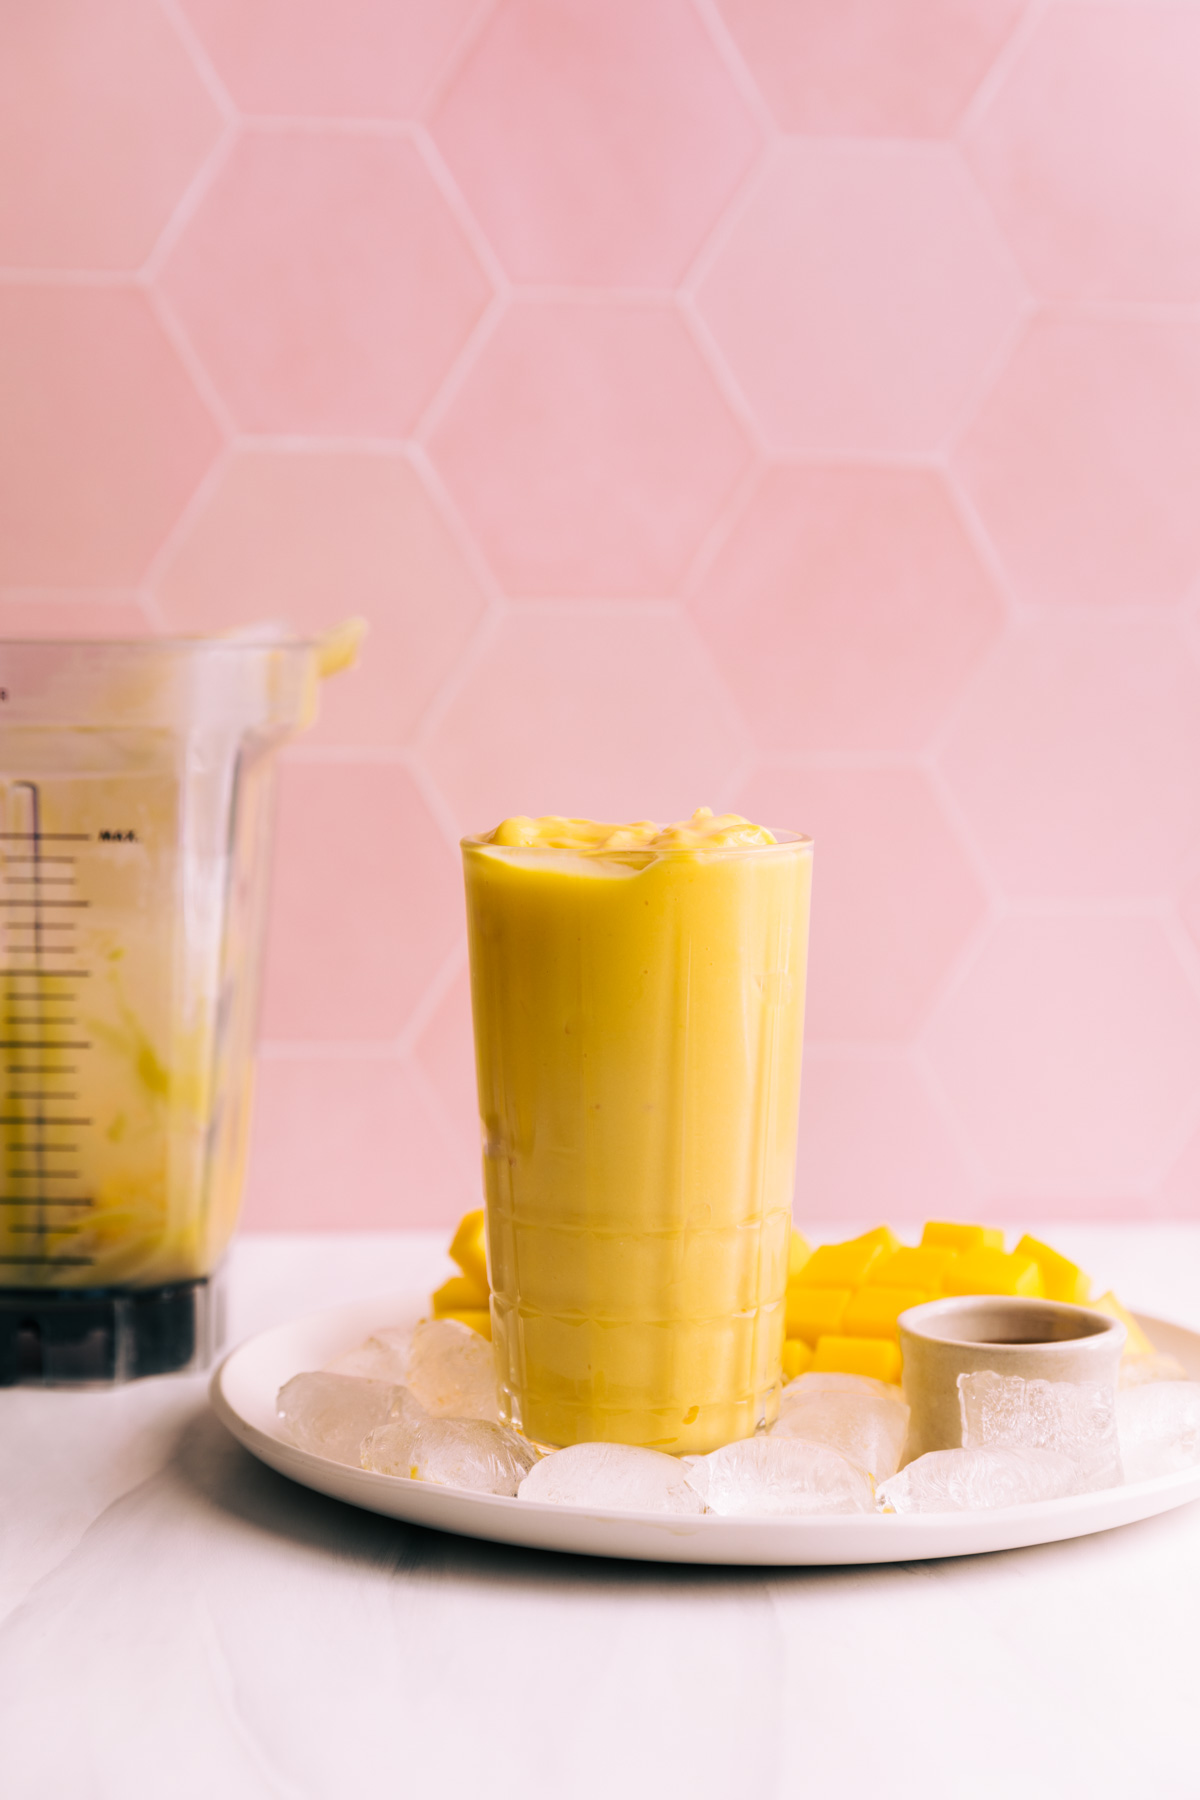 Mango lassi in a tall glass on a plate with ice cubes and fresh mango and a blender container with mango lassi in it in front of a pink tile backdrop